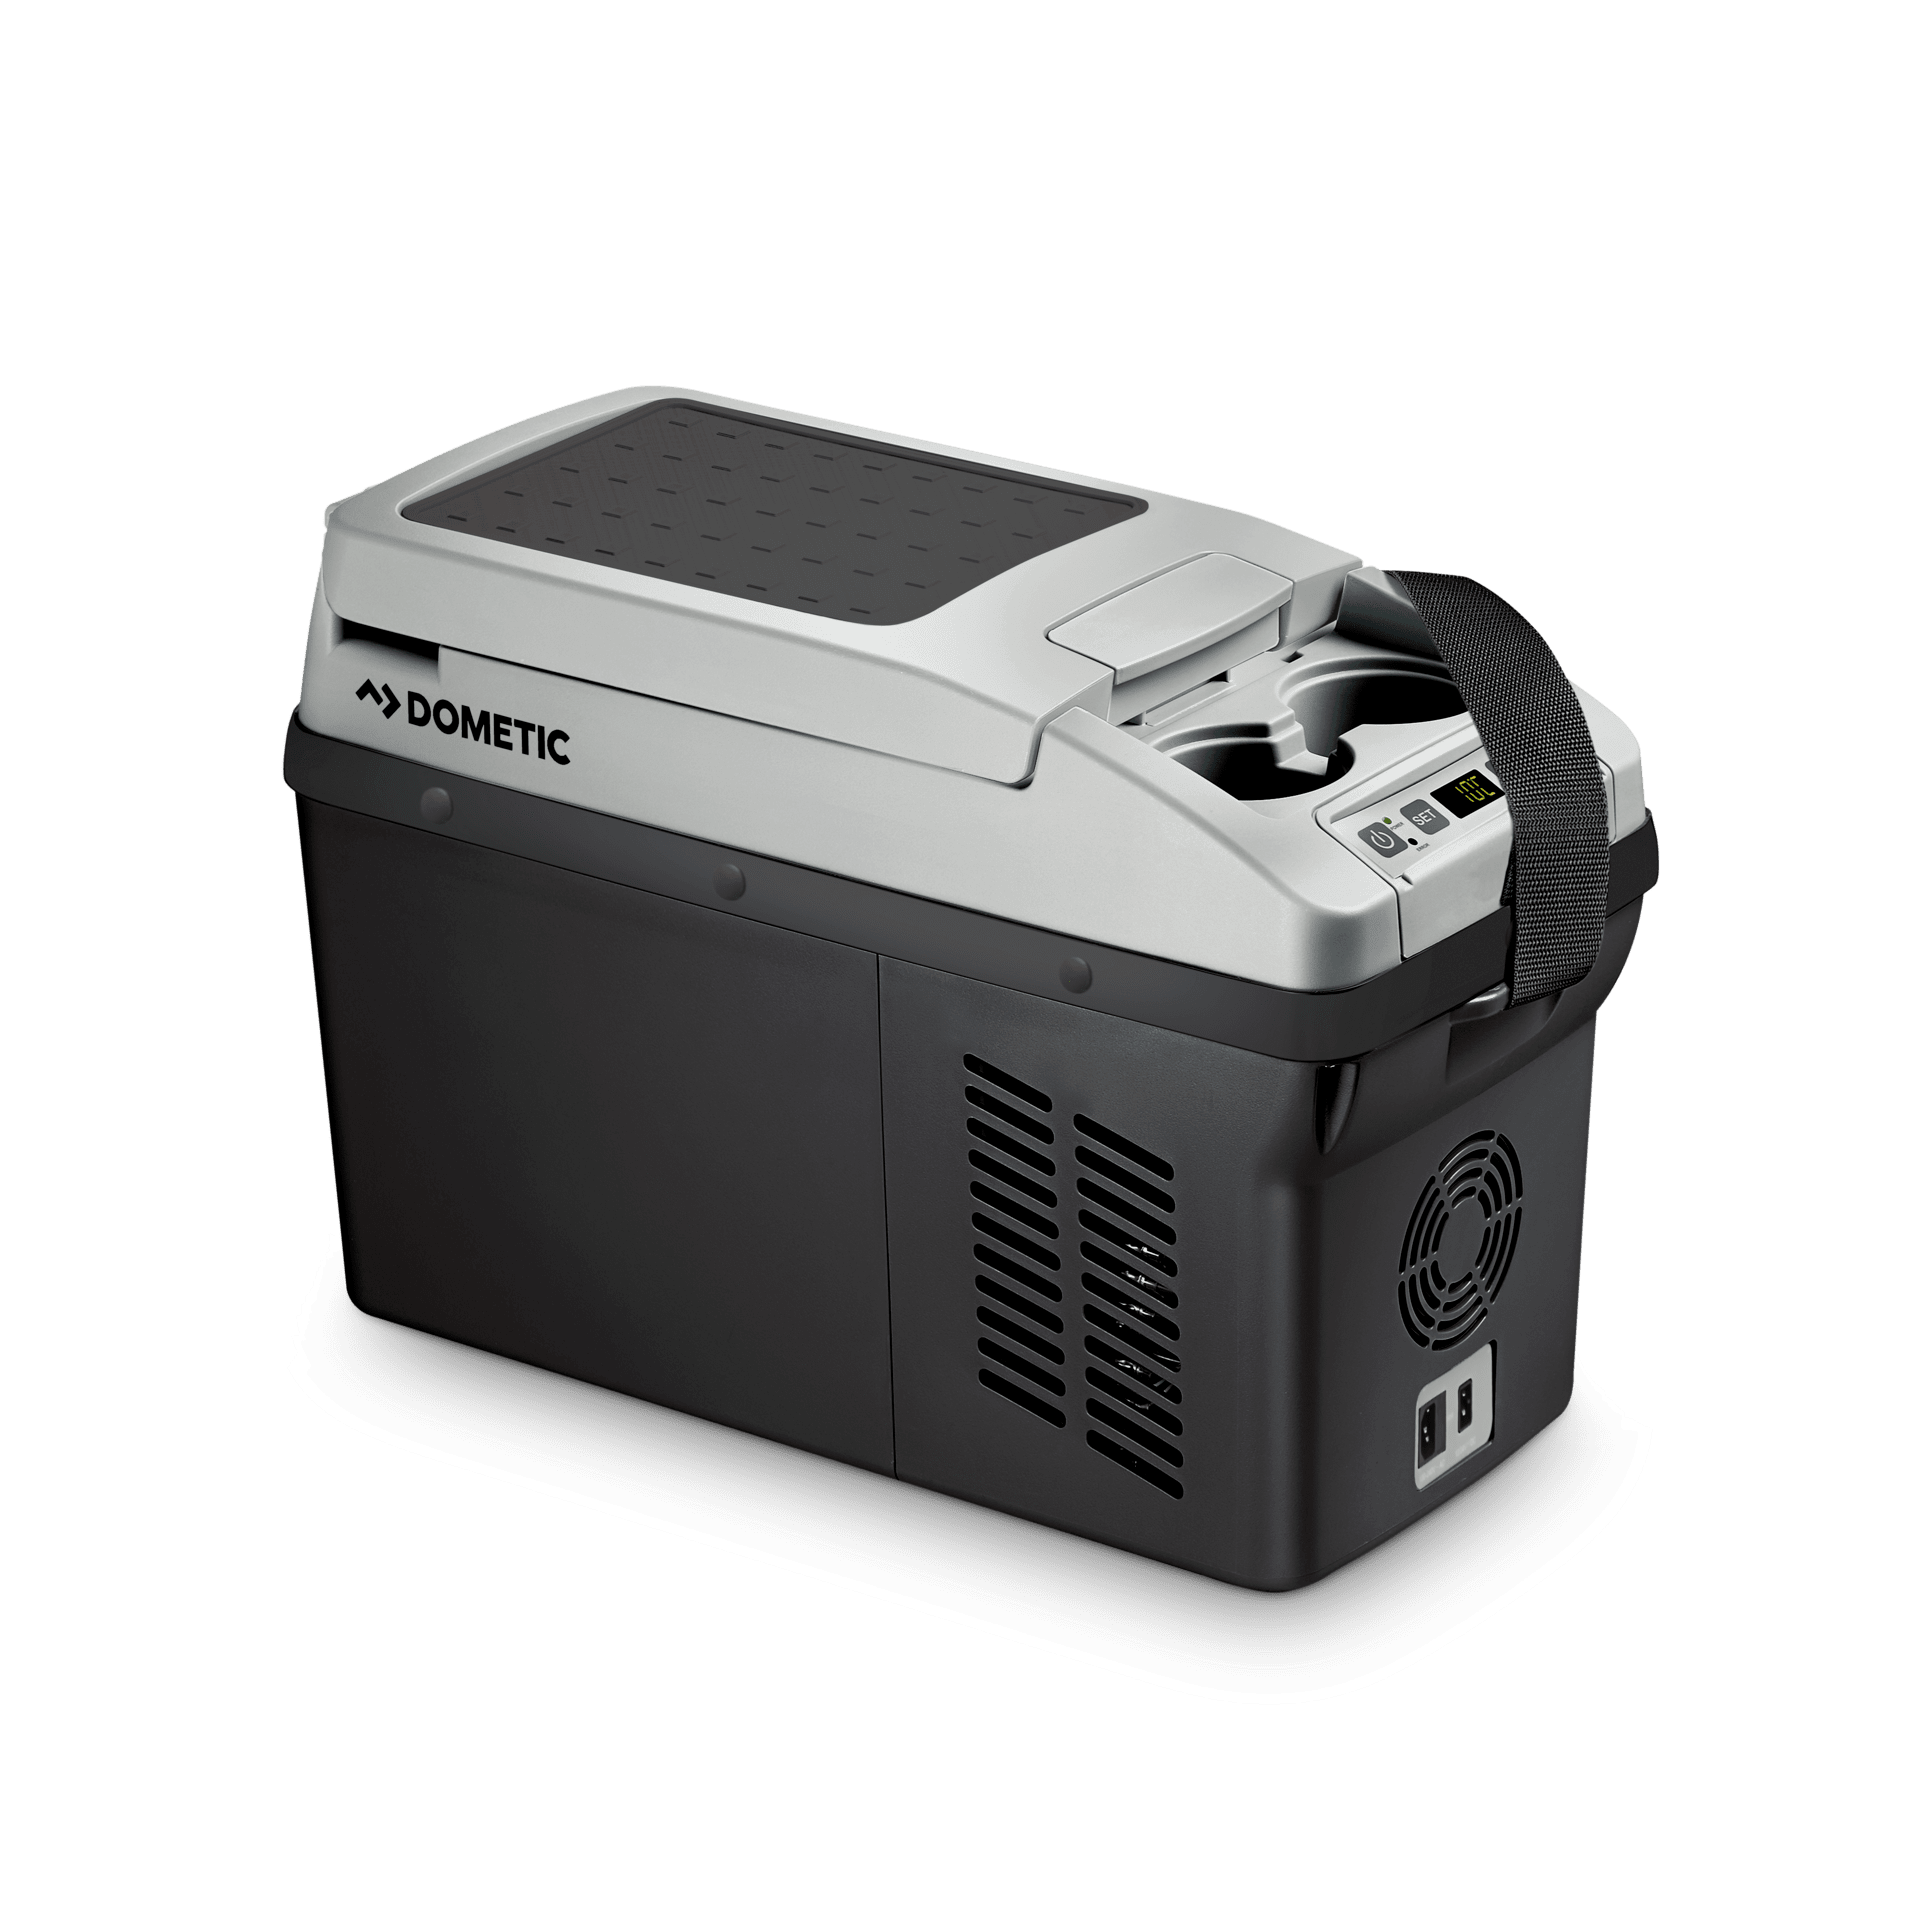 Dometic Coolfreeze Cf 11 Portable